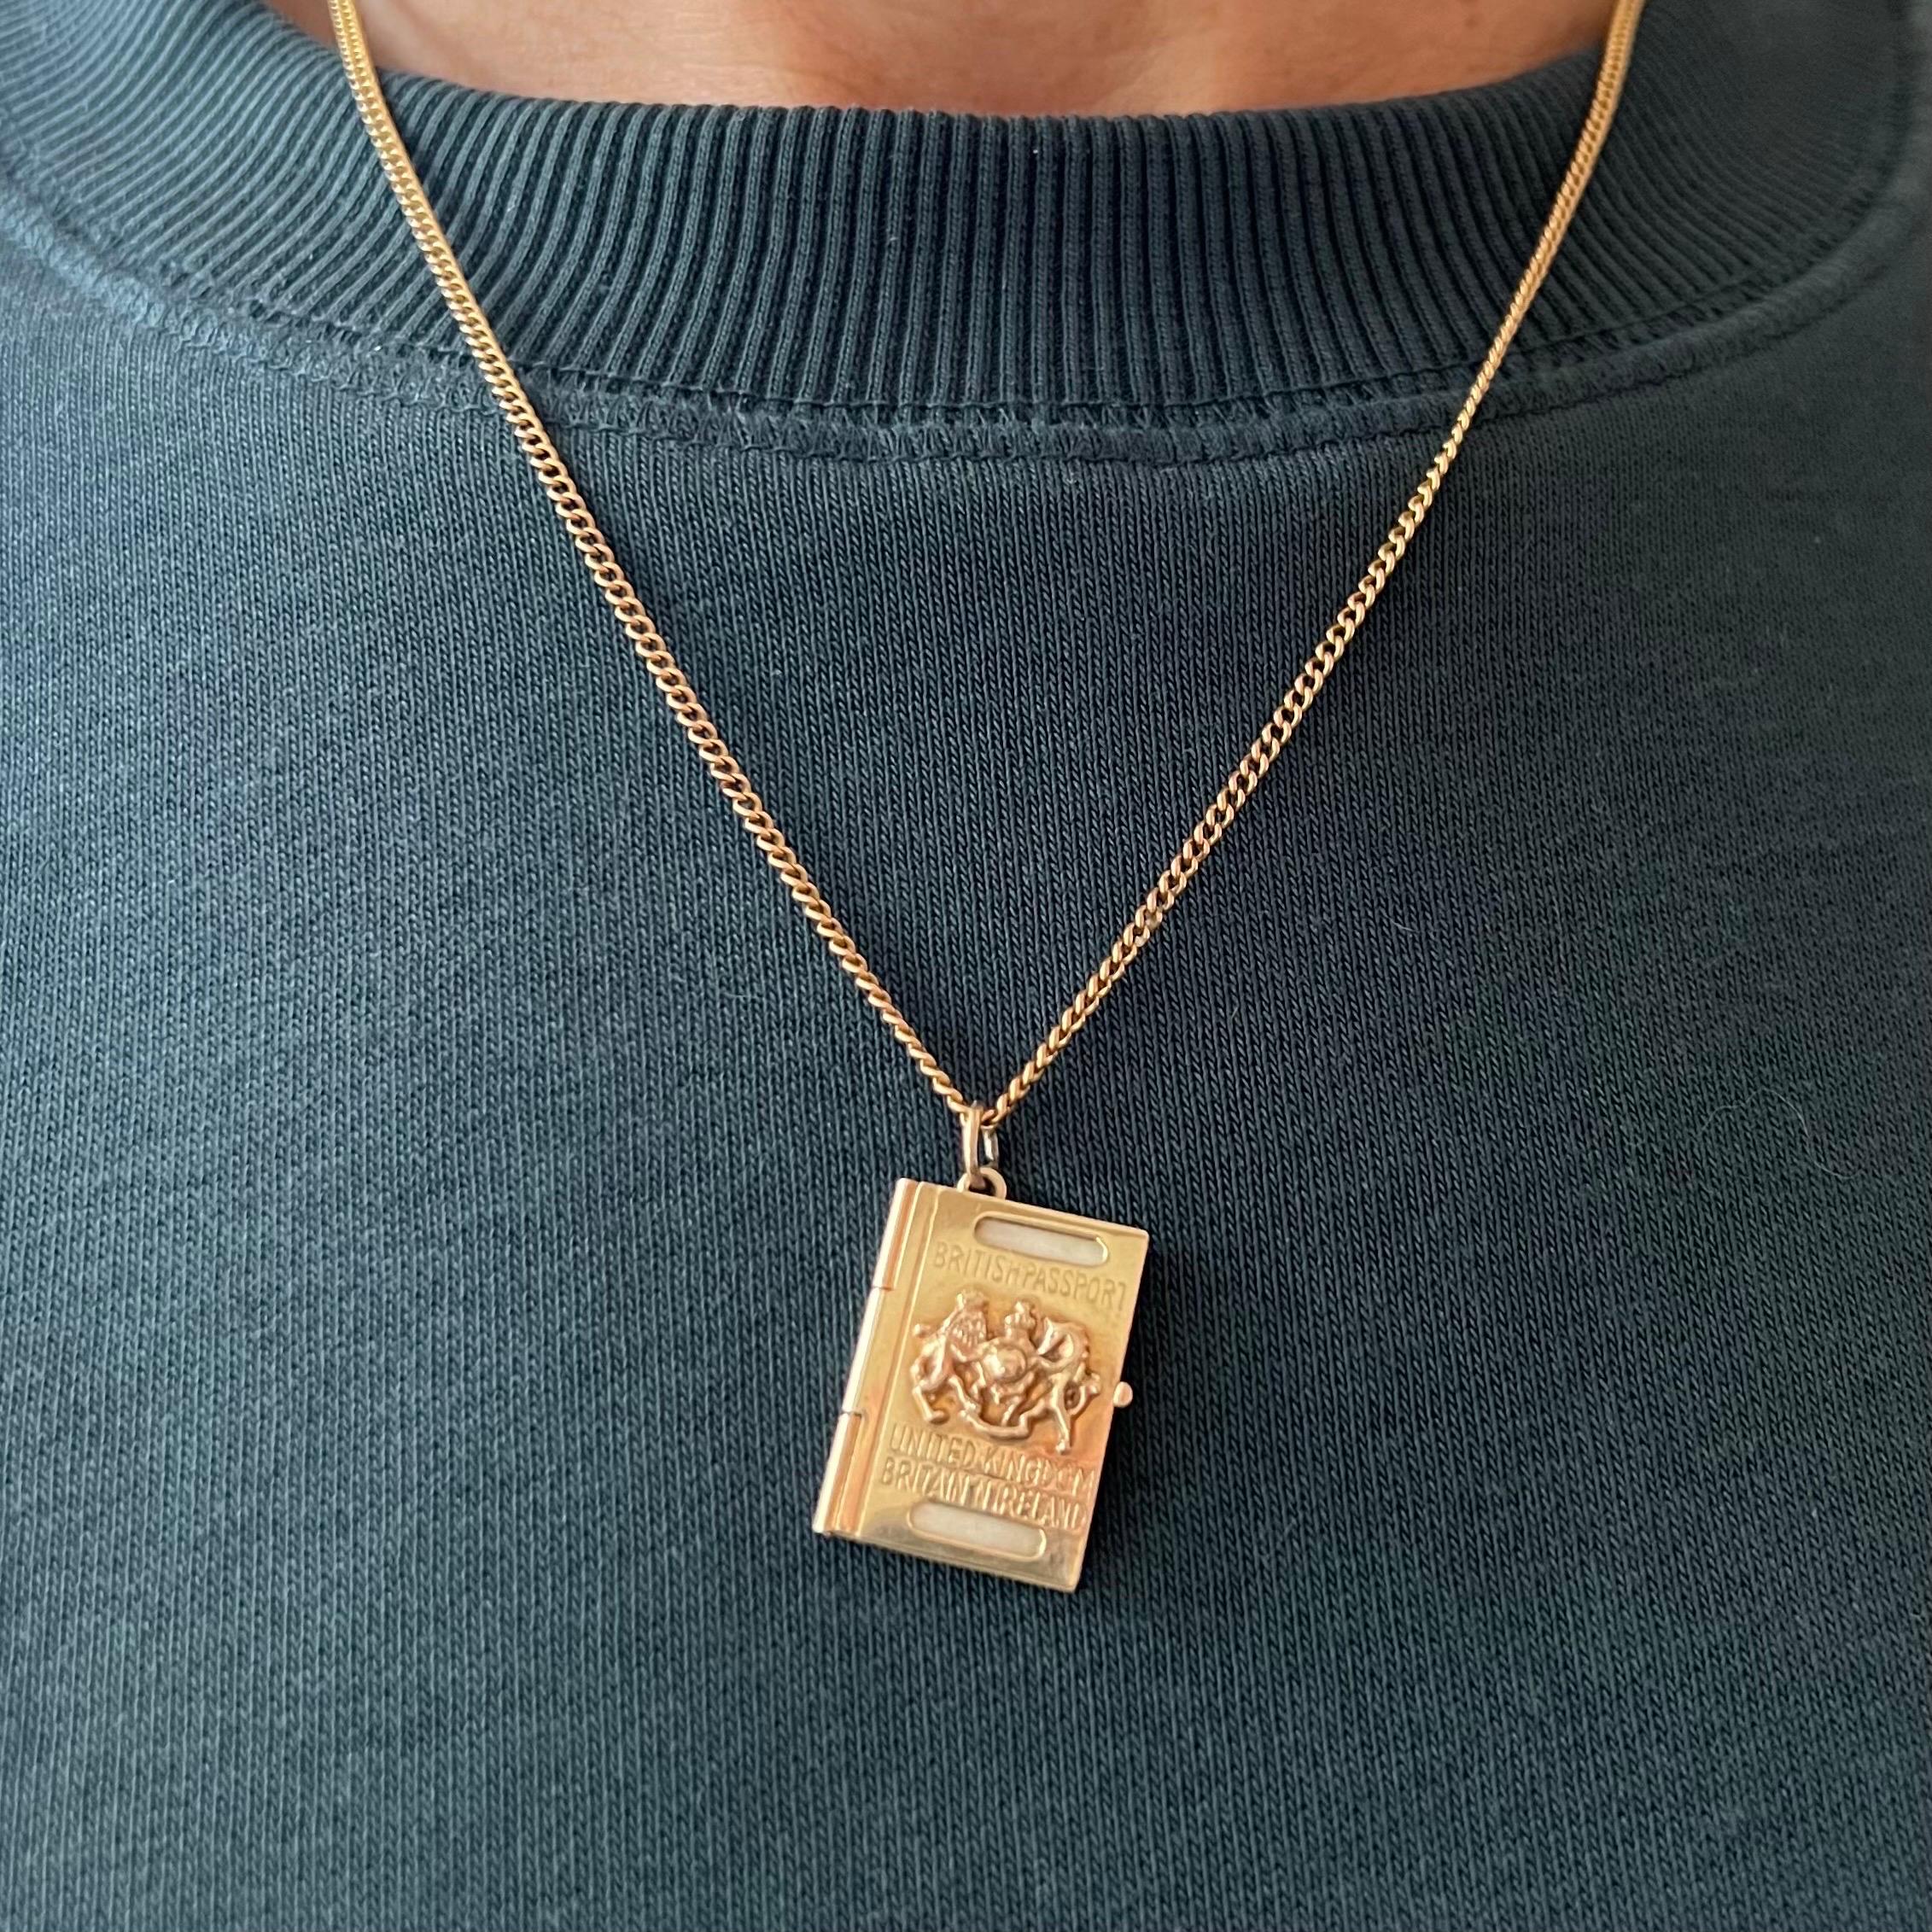 A vintage 9 karat yellow gold British Passport charm pendant. This miniature travel document is beautifully detailed with stamped papers on the inside. The gorgeous relief cover displays the British coat of arms depicting a lion and a unicorn